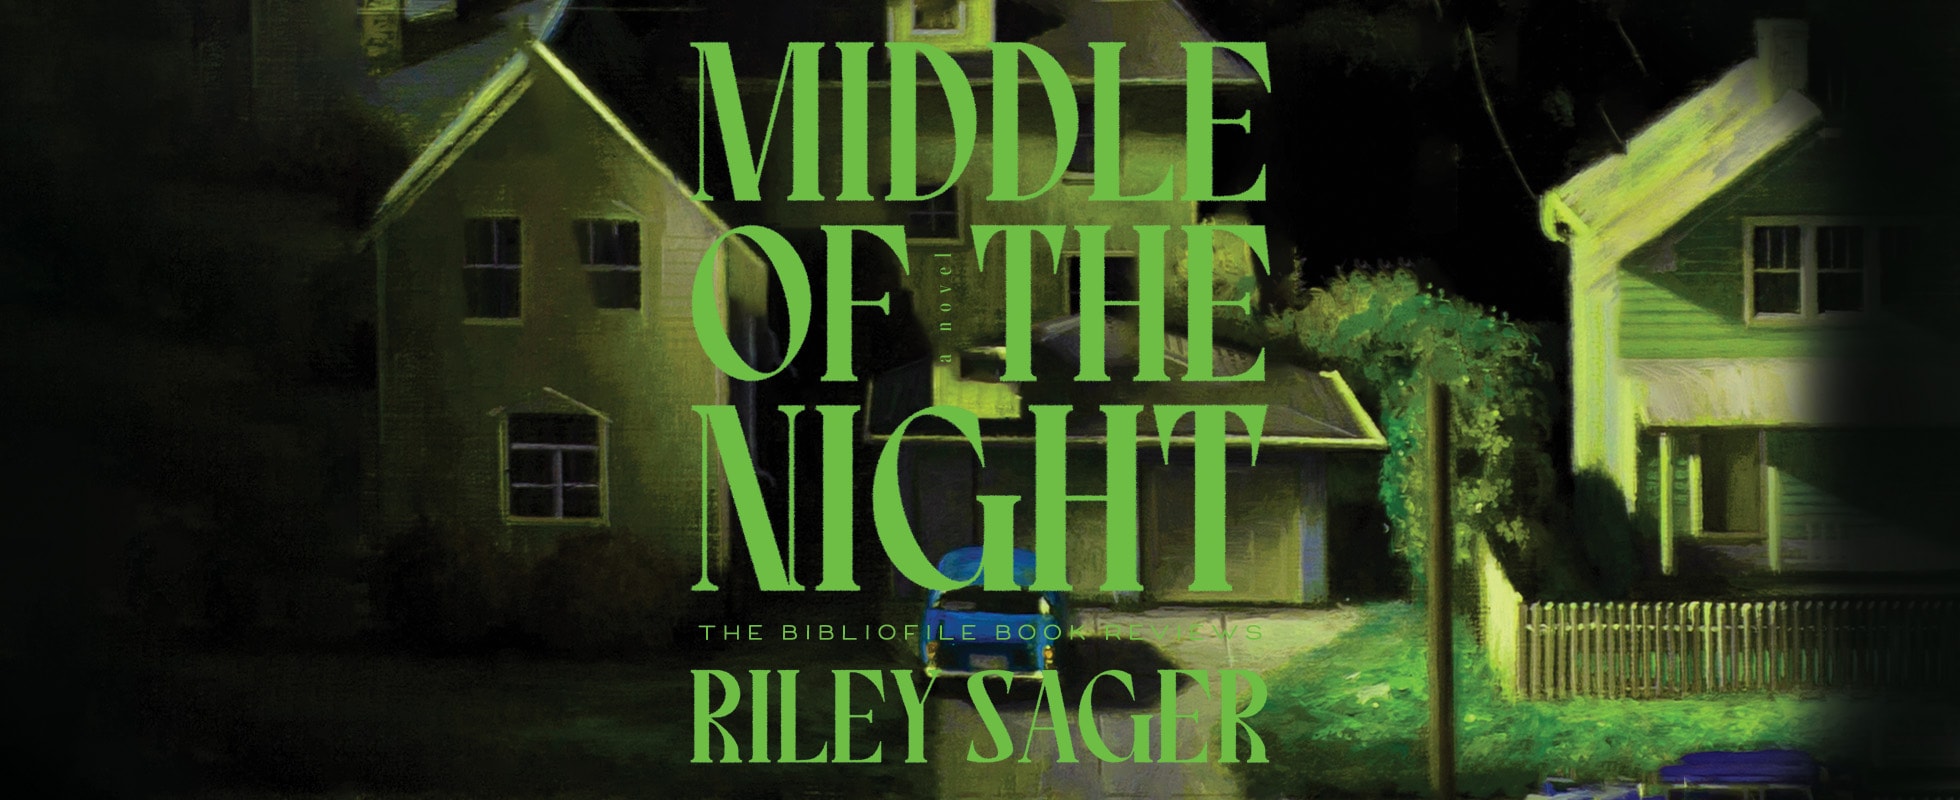 Middle of the Night by Riley Sager, book review plot summary synopsis recap discussion spoilers